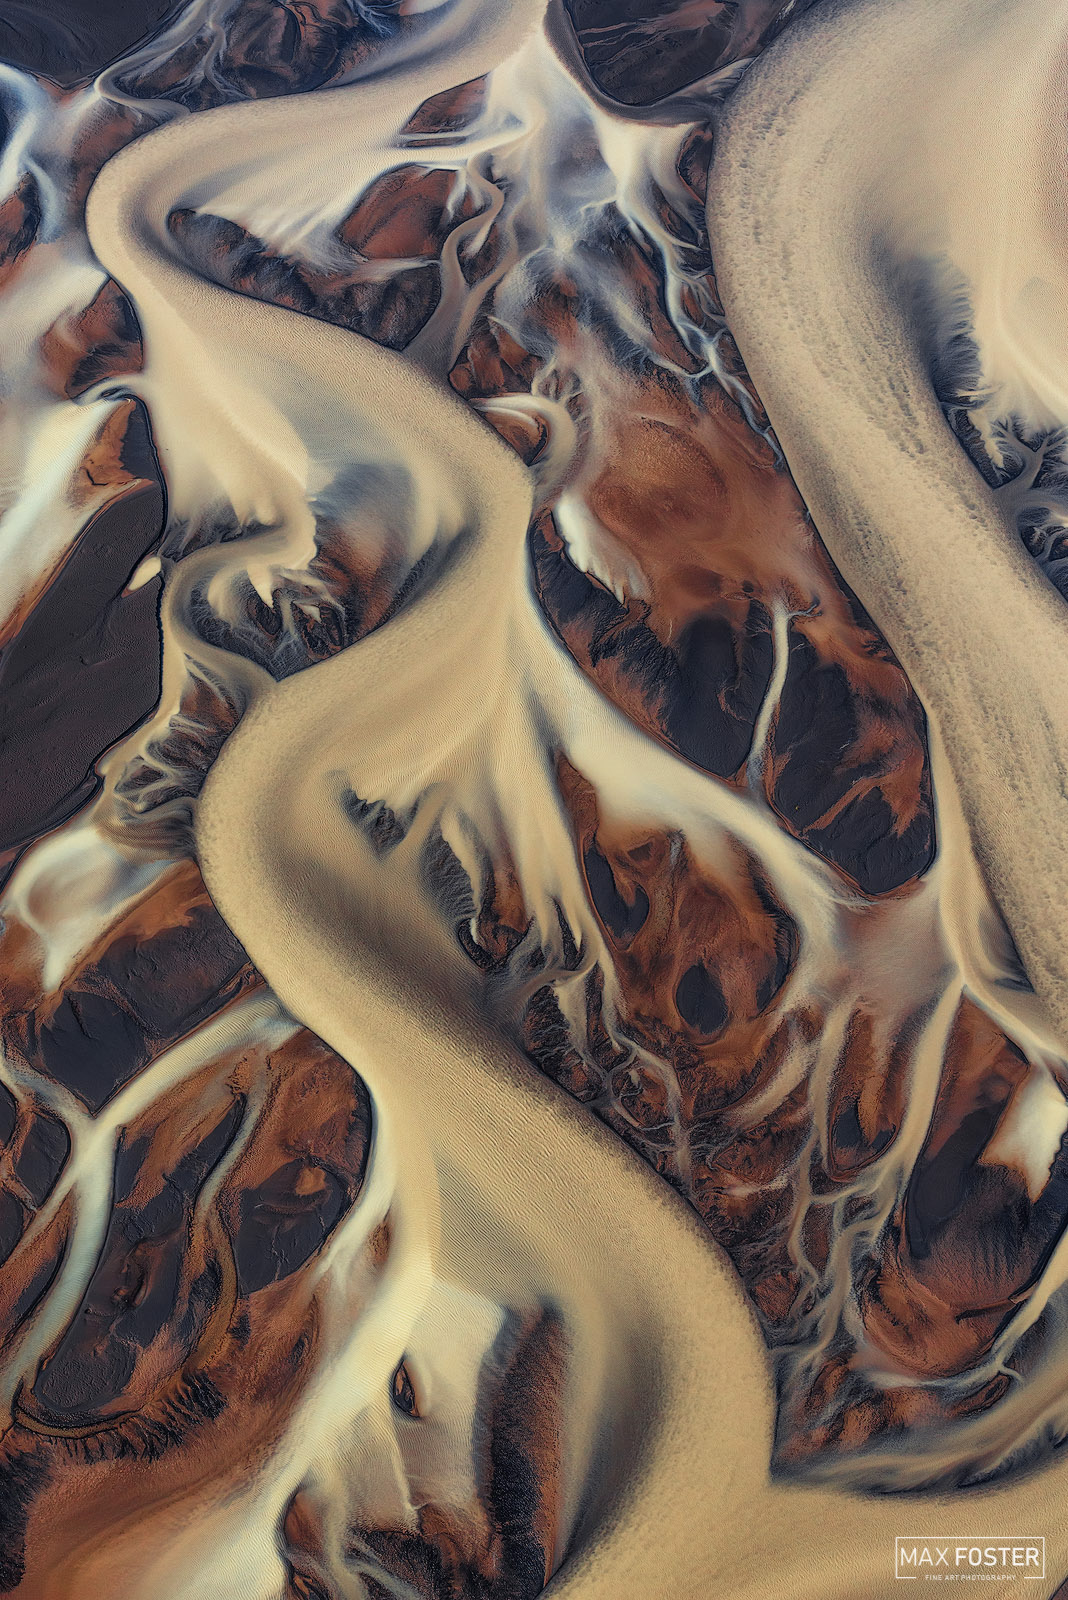 Breath new life into your home with Elemental, Max Foster's limited edition aerial photography print of rivers in Iceland from...